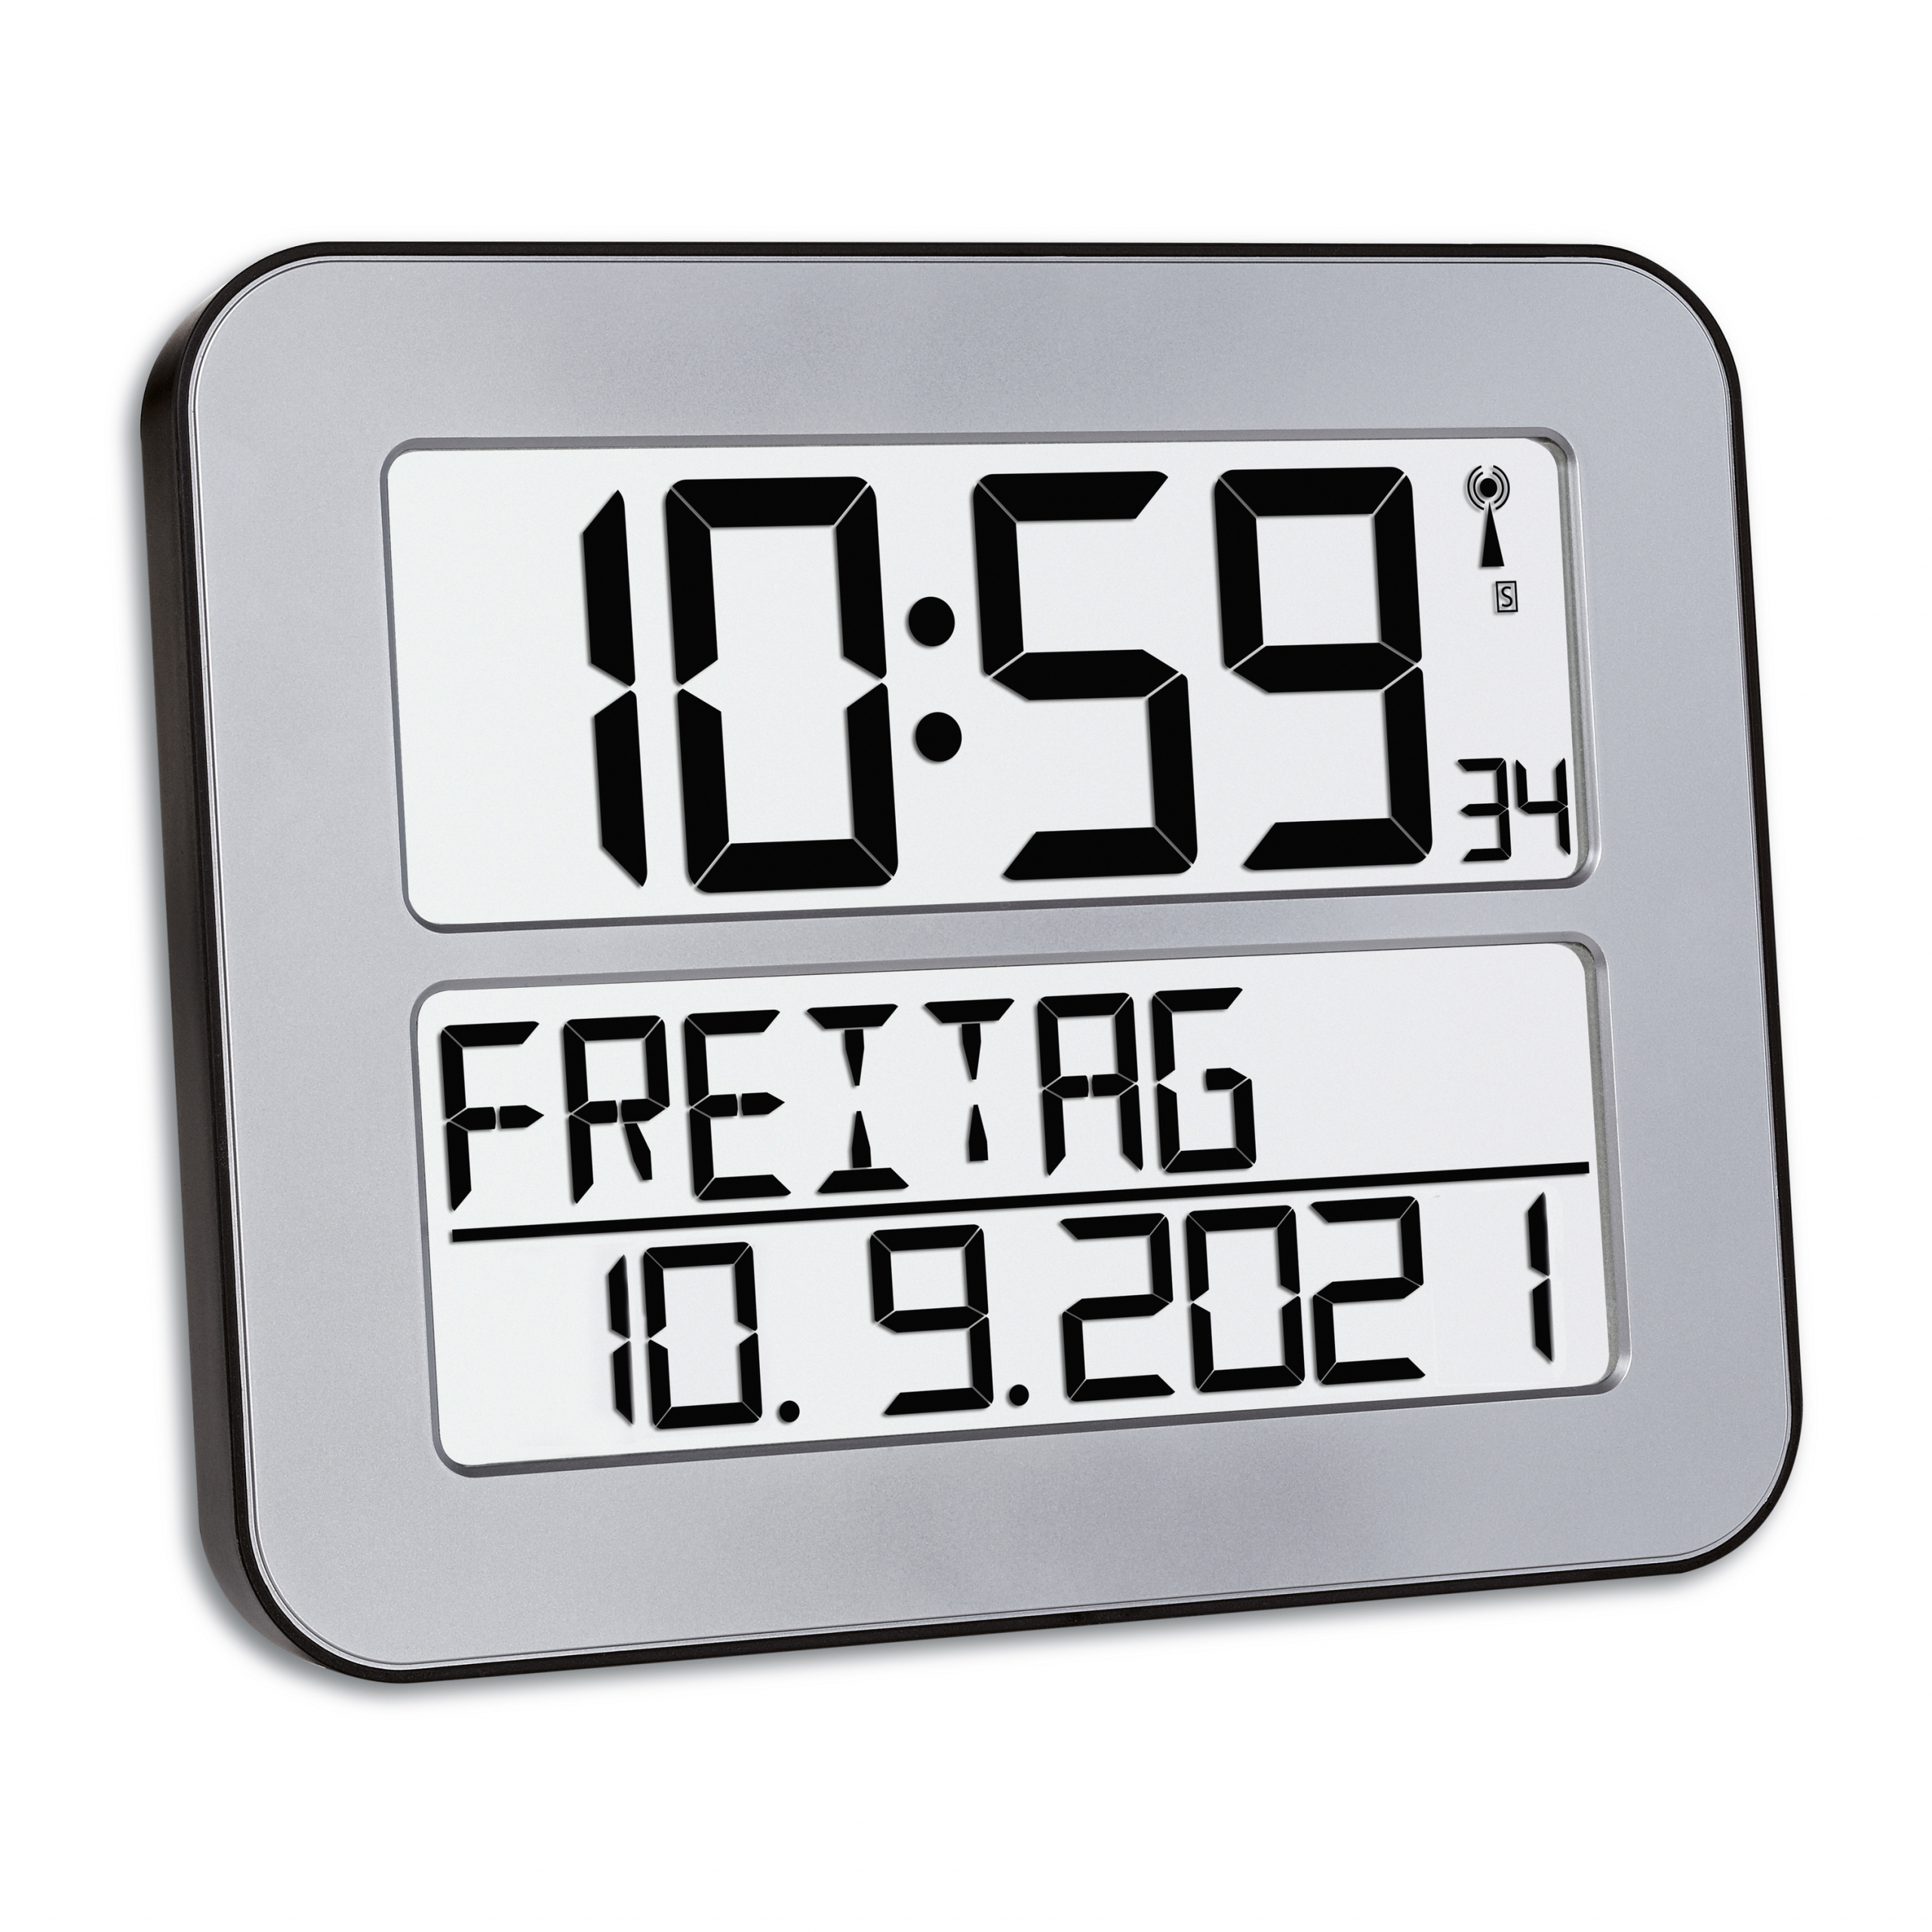 TFA Dostmann "Time Line" Radio Clock with Temperature display the indoor temperature NEW